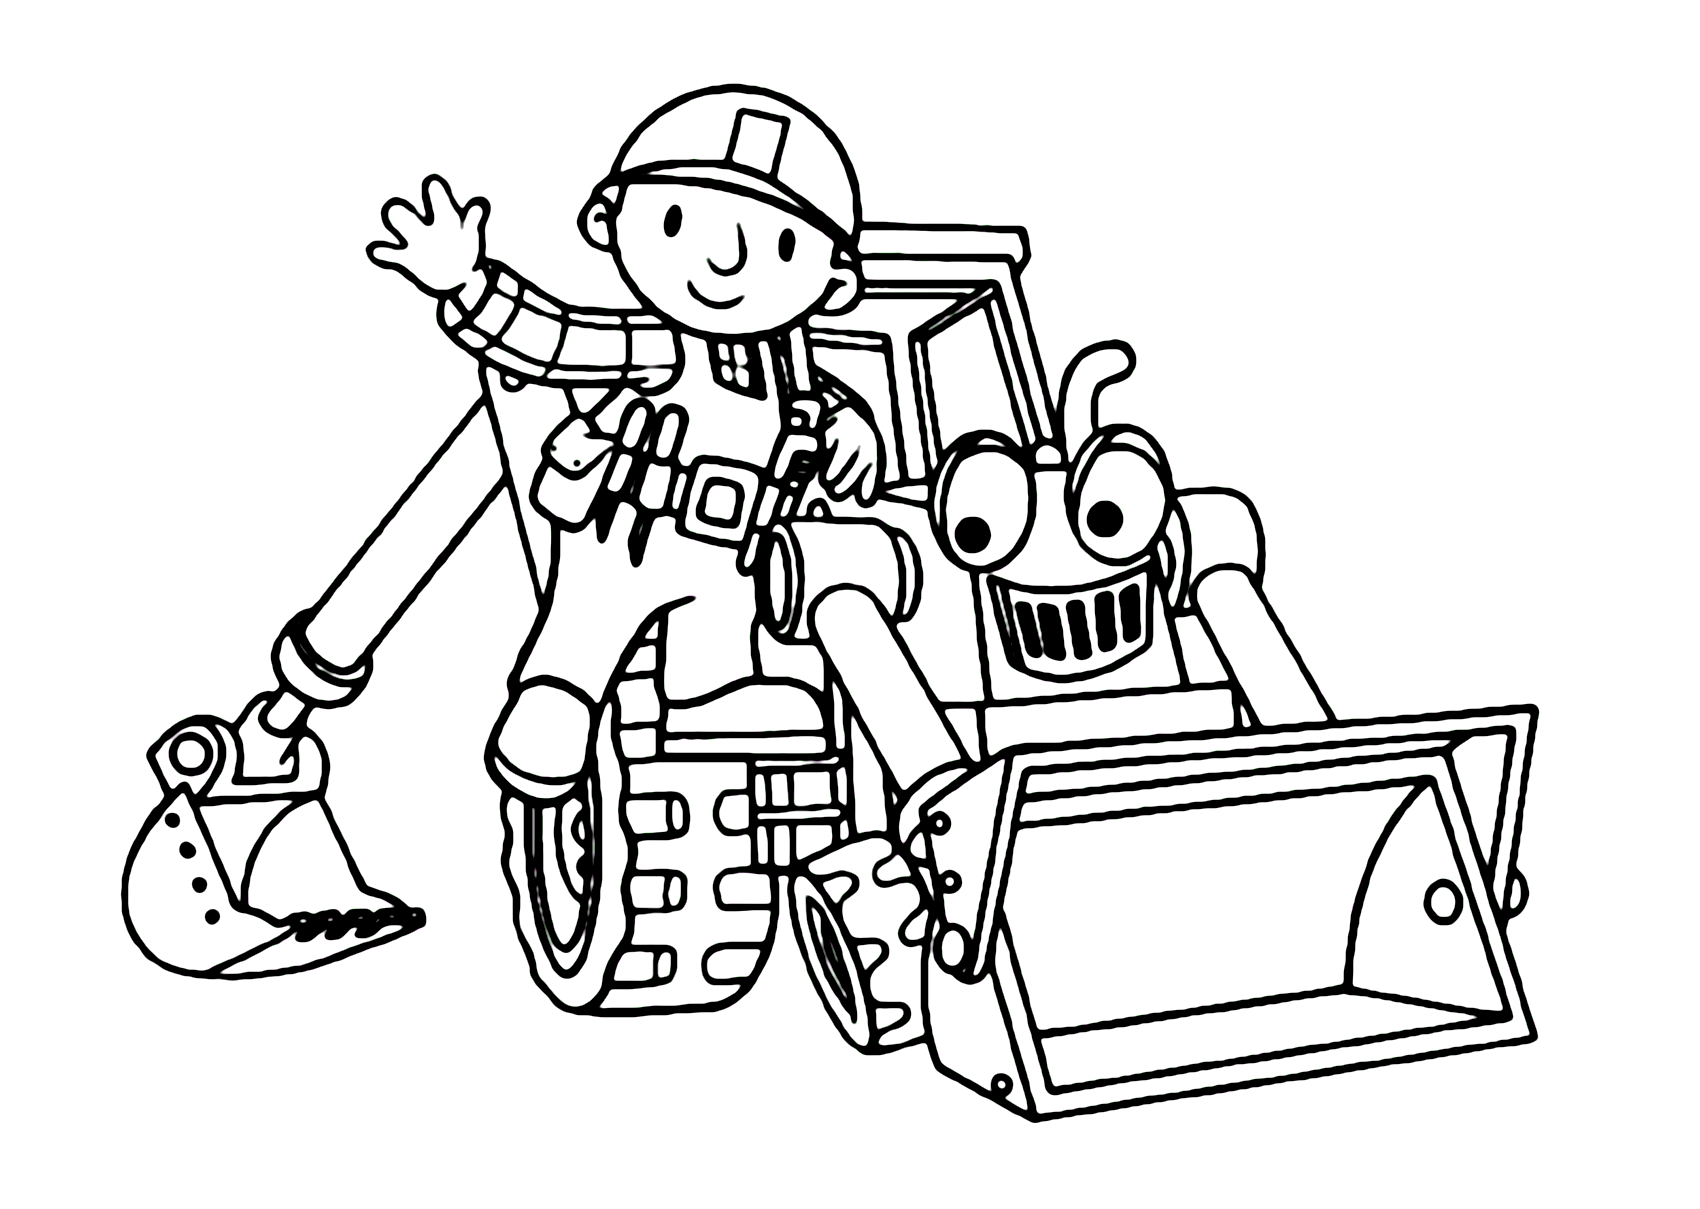 Printable Bob the Builder Coloring Page